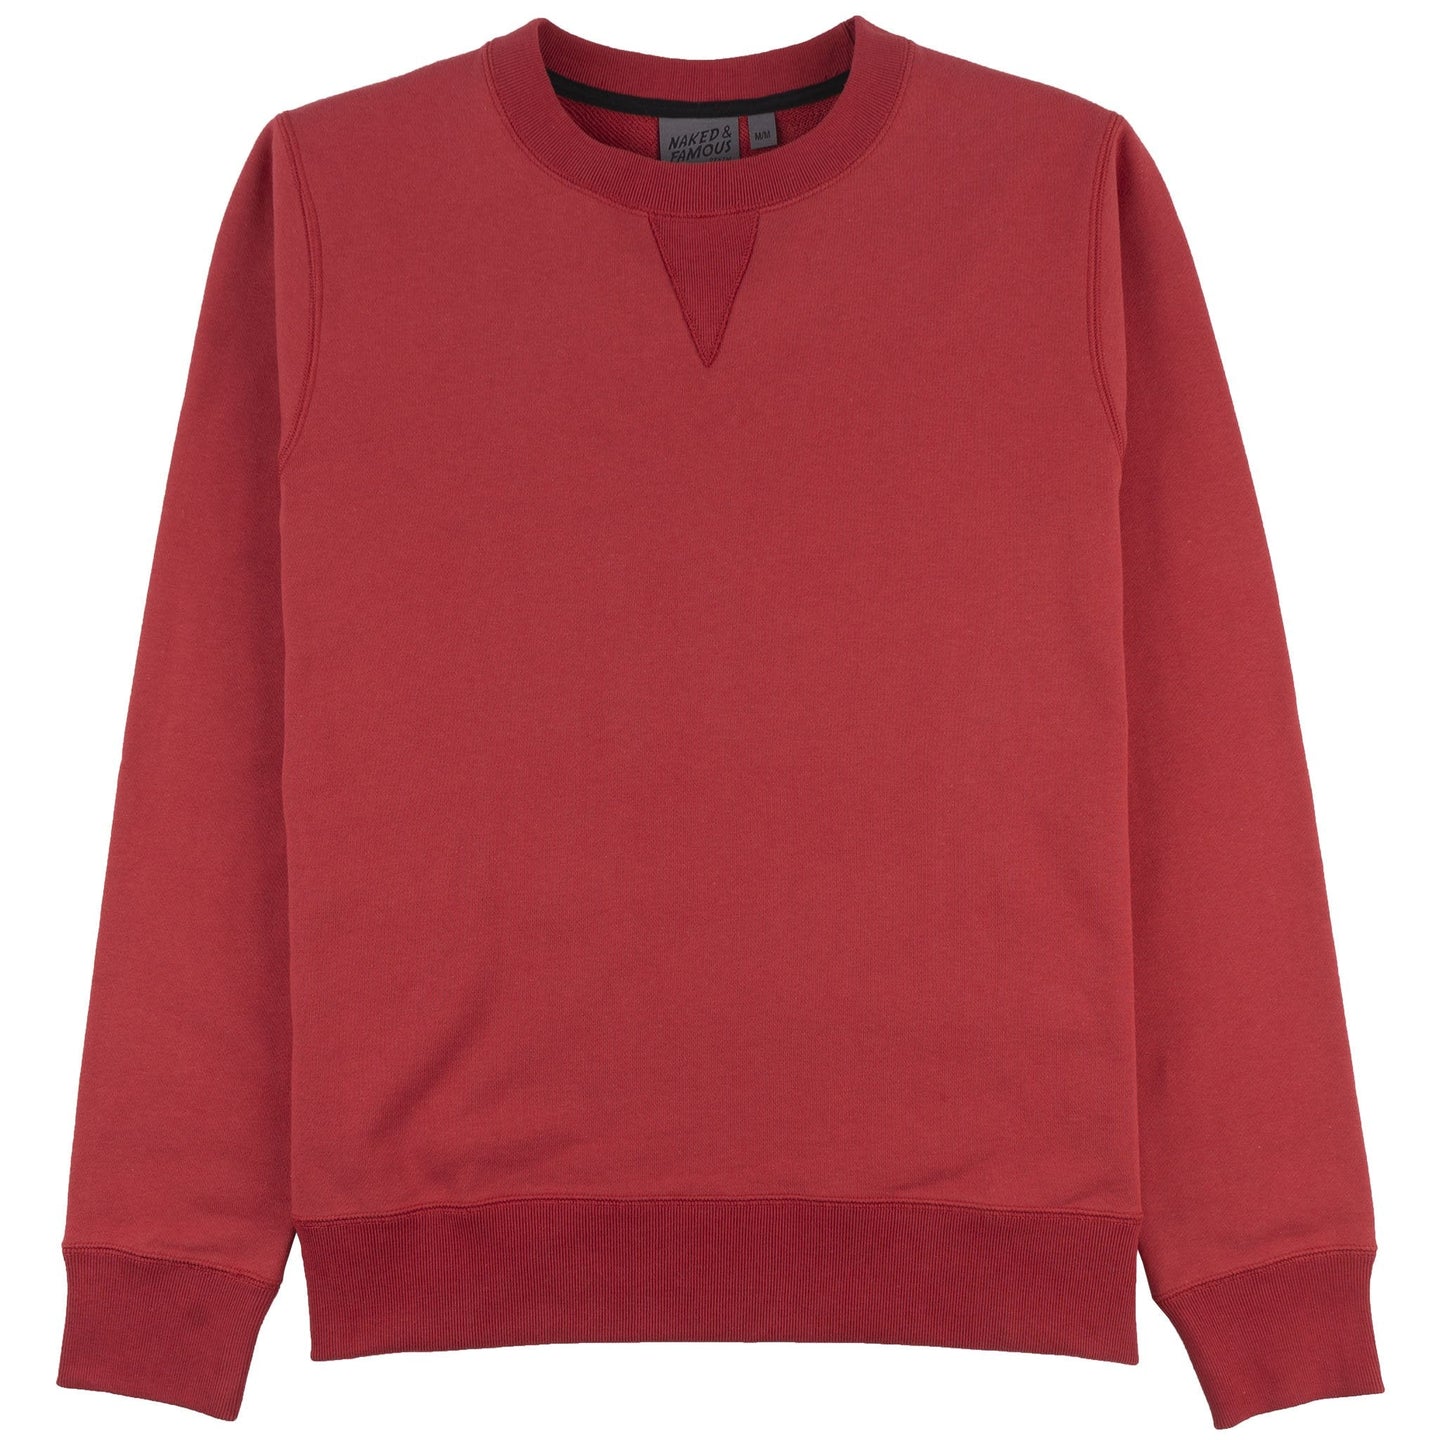 Crewneck - Heavyweight Terry - Red - Front